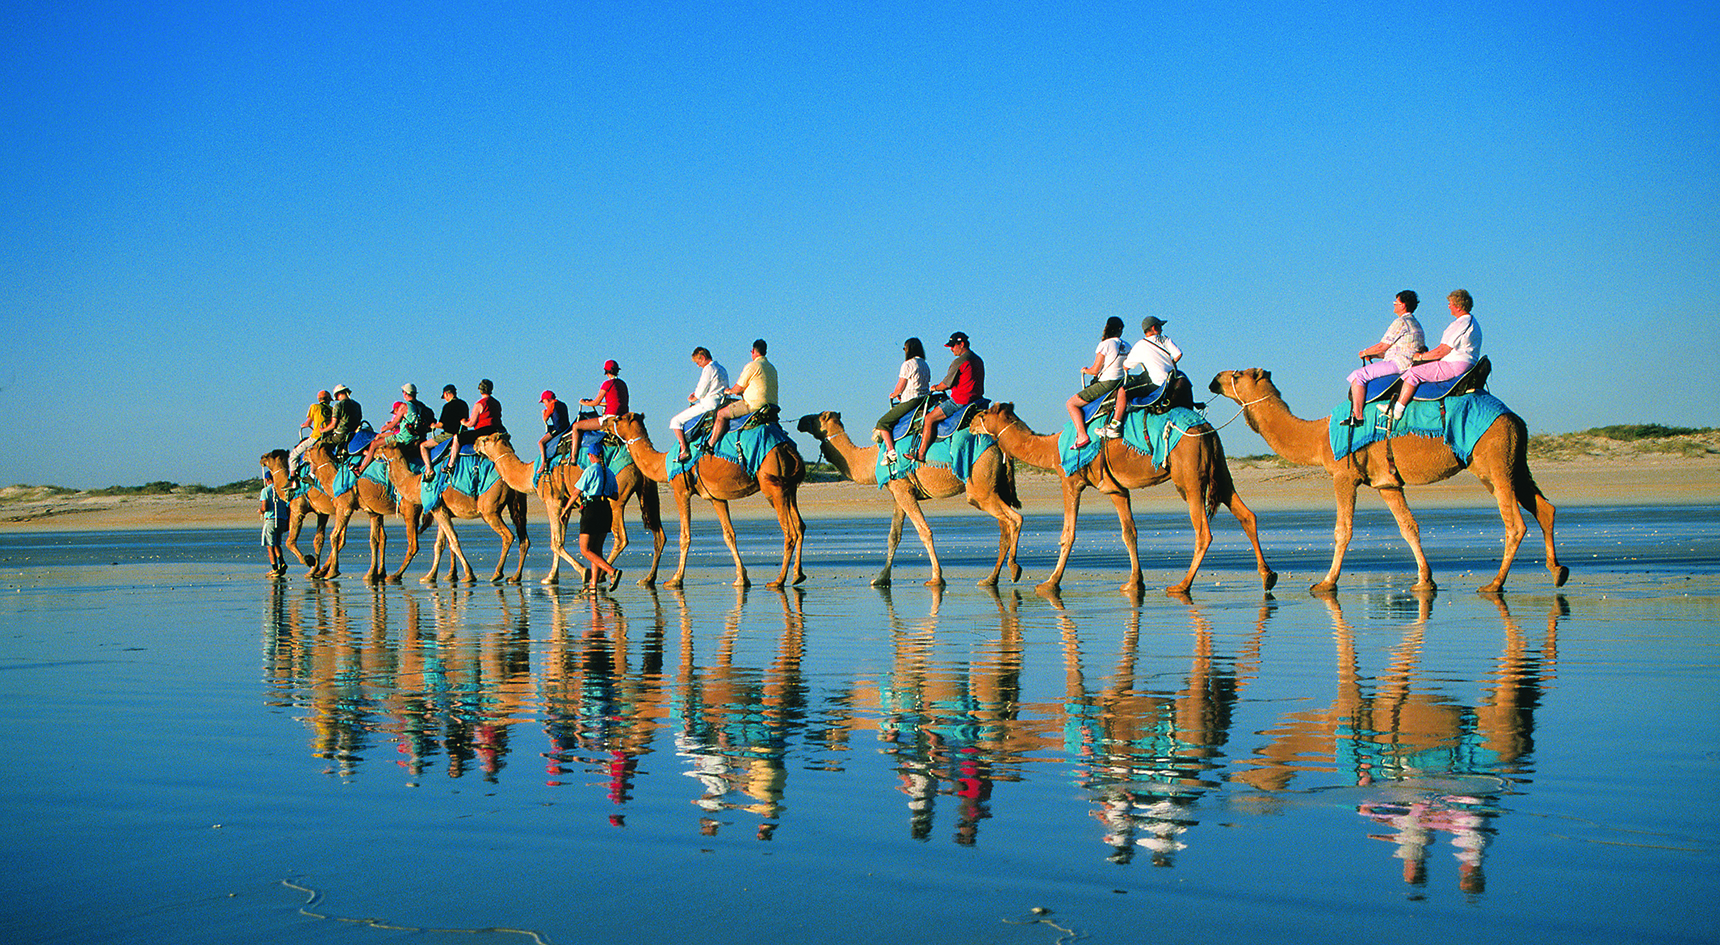 People riding camels at Broome's Cable Beach in WA.